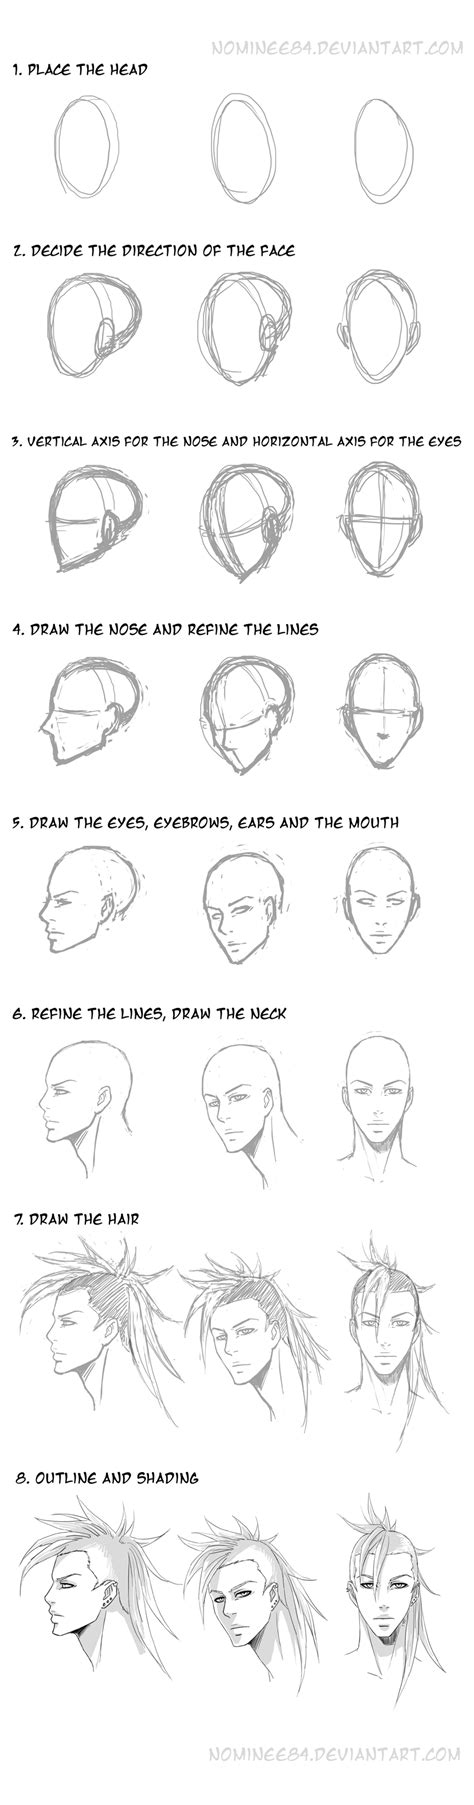 How I Draw Head N Face By Nominee84 On Deviantart Drawing Skills